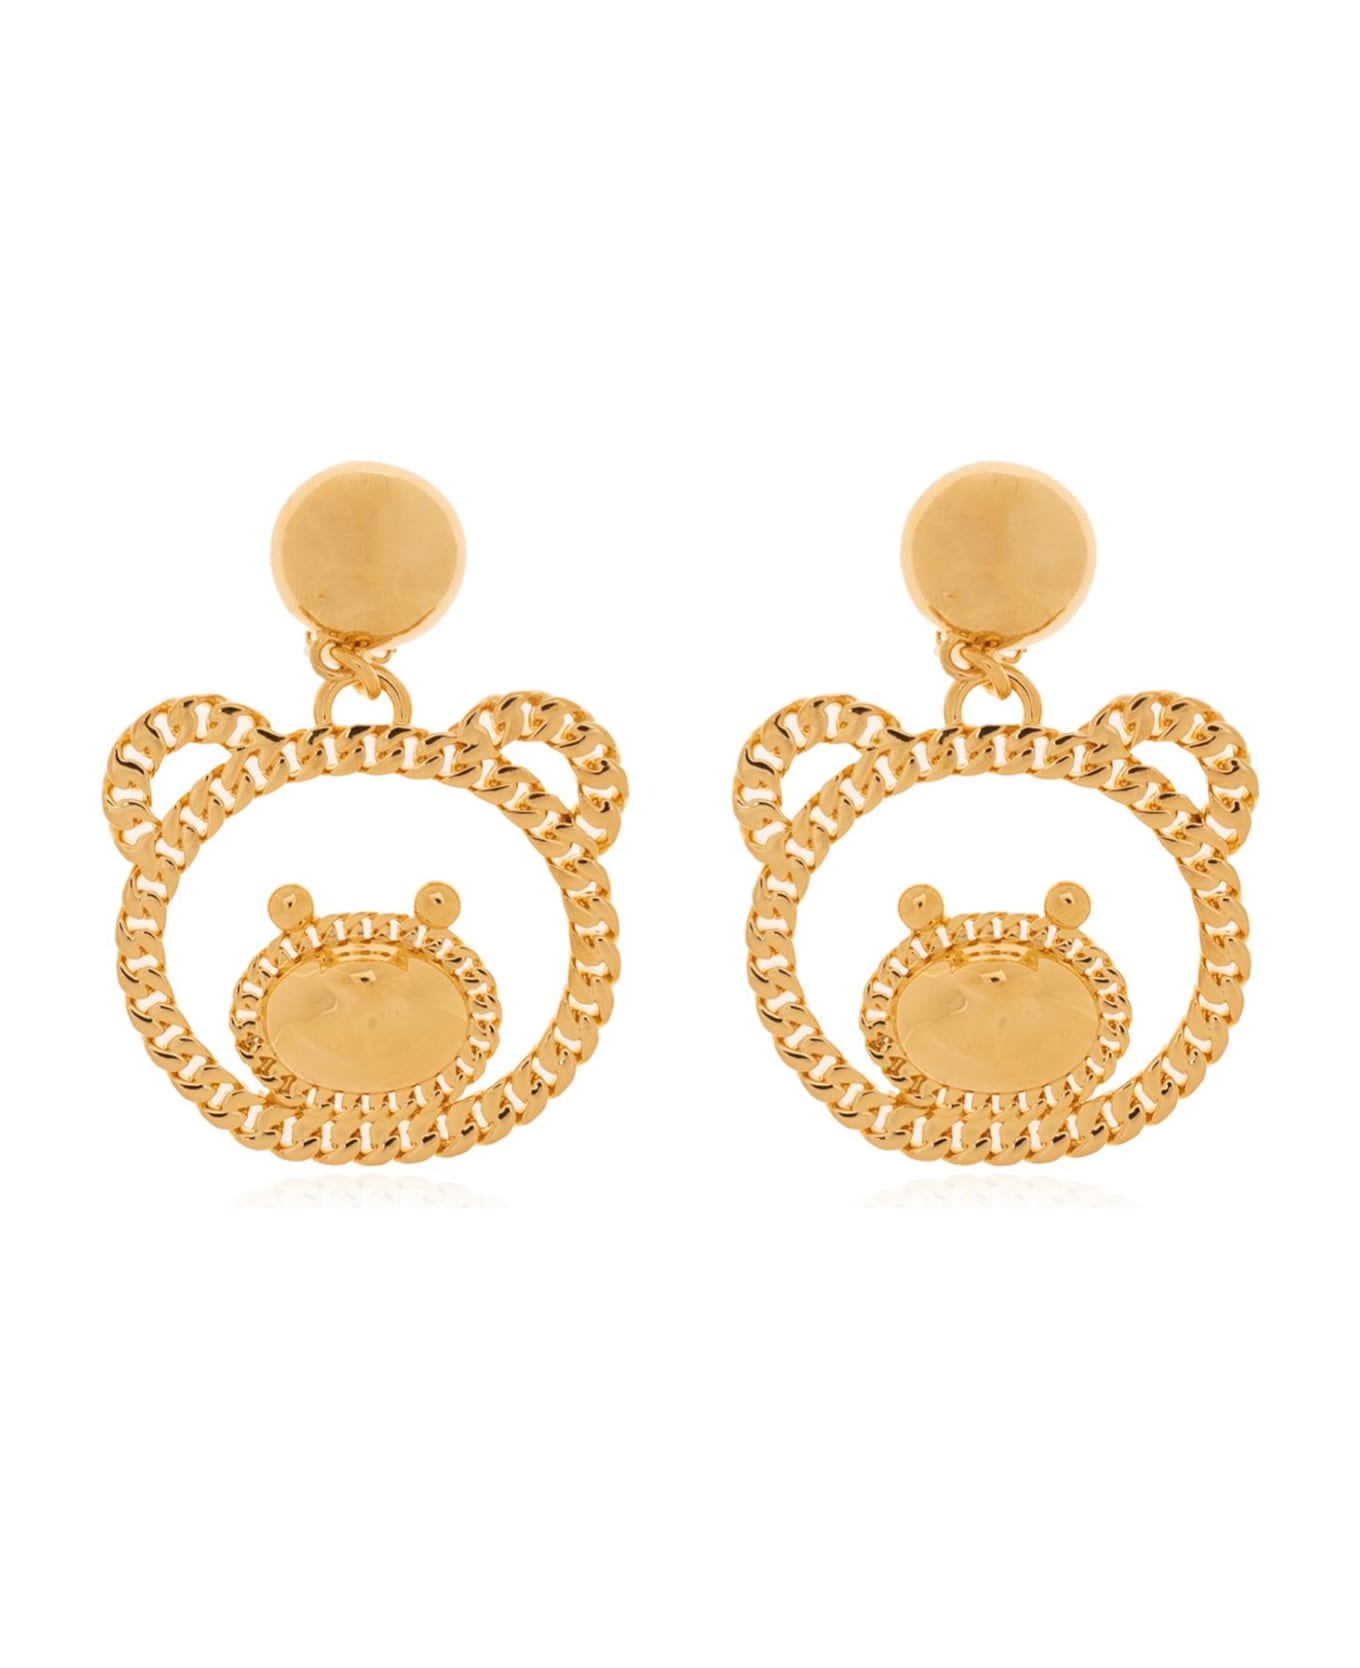 Moschino Clip-on Earrings With Teddy Bear Charm - GOLD